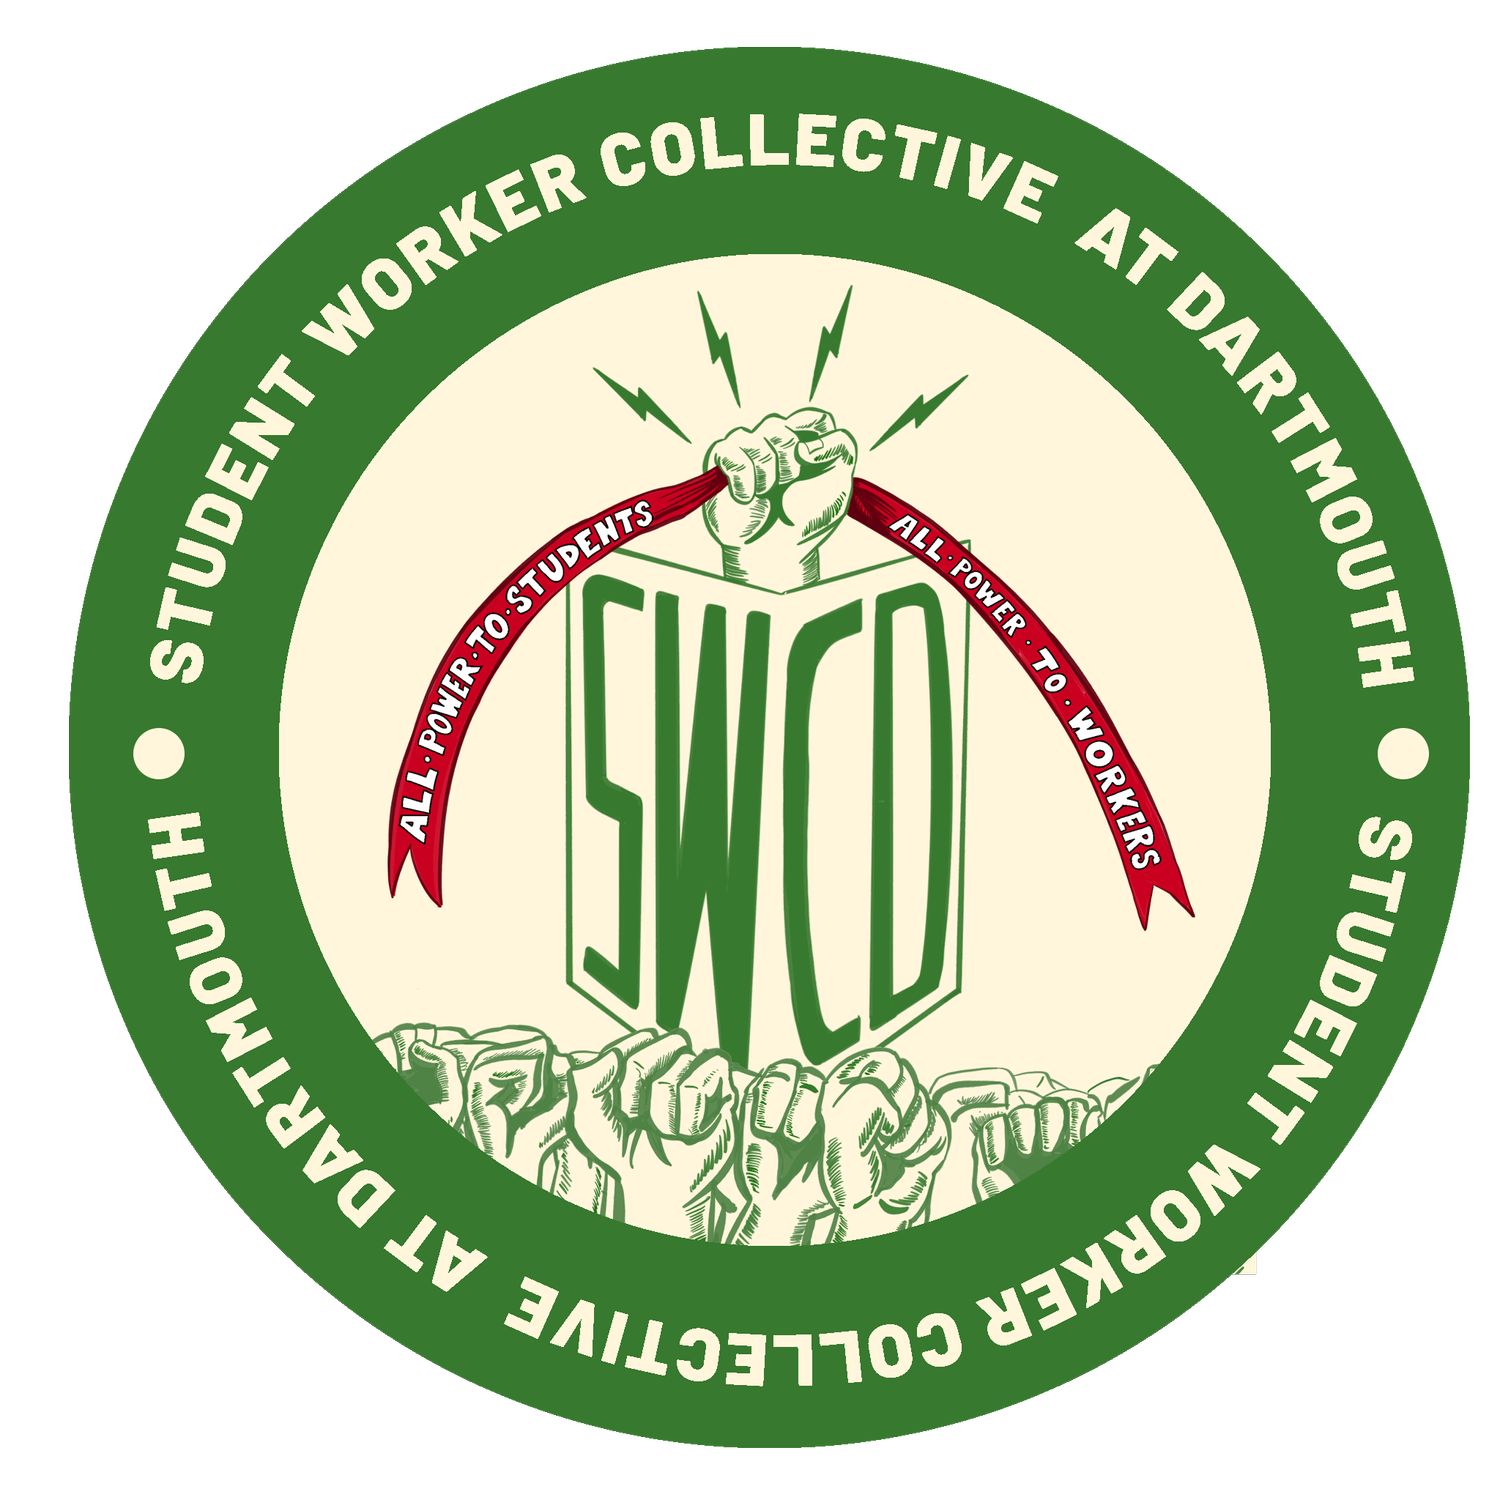 Student Worker Collective at Dartmouth